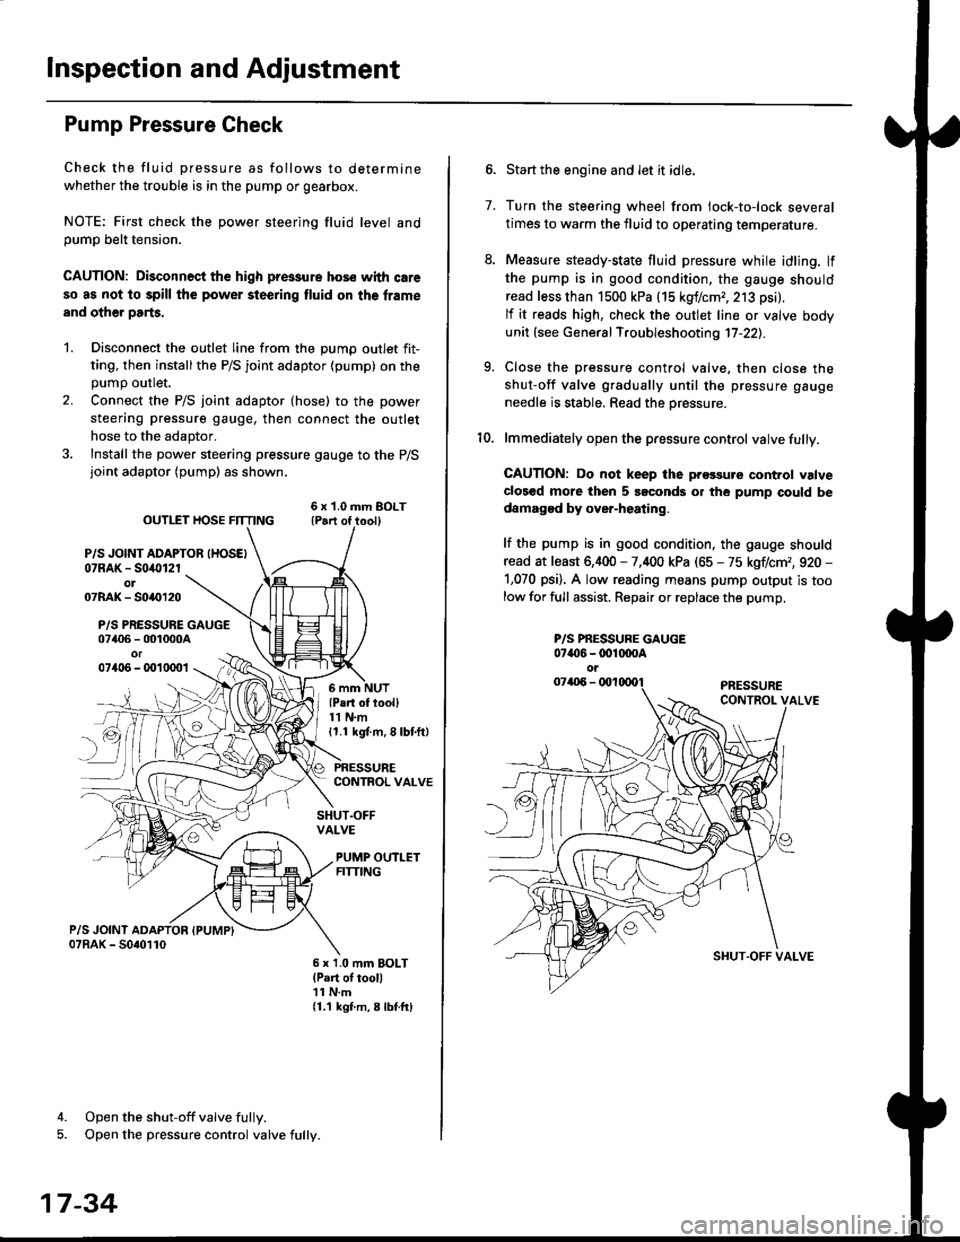 HONDA CIVIC 2000 6.G Workshop Manual lnspection and Adjustment
Pump Pressure Check
Check the fluid pressure as follows to determine
whether the trouble is in the pump or gearbox.
NOTE: First check the power steering fluid level andpump b